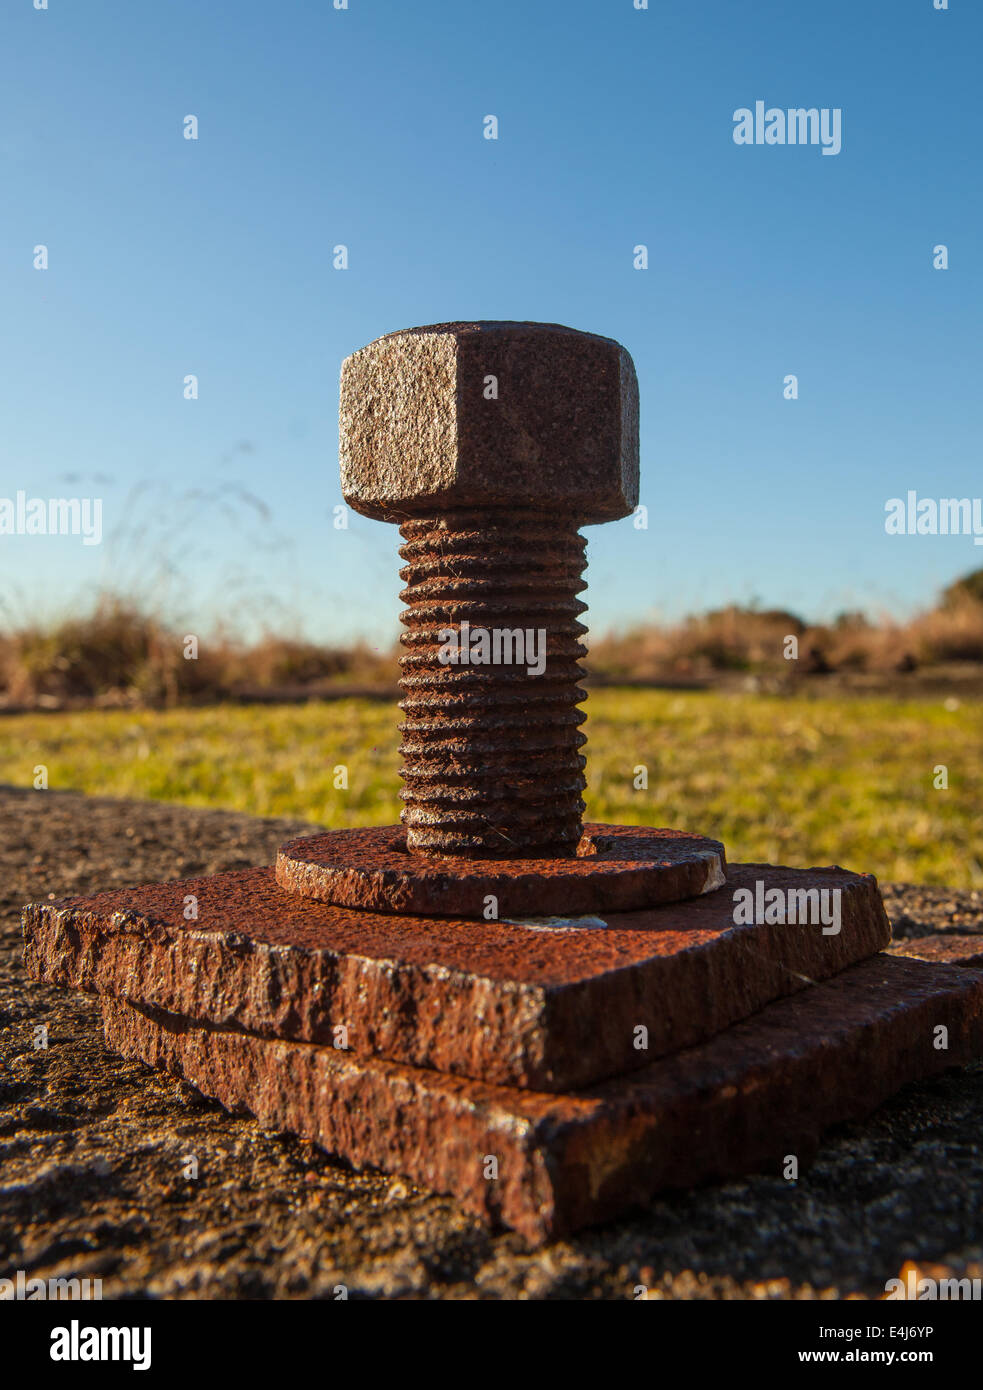 A close-up of a rusty bolt on a thread, probably used as an industrial mounting point Stock Photo